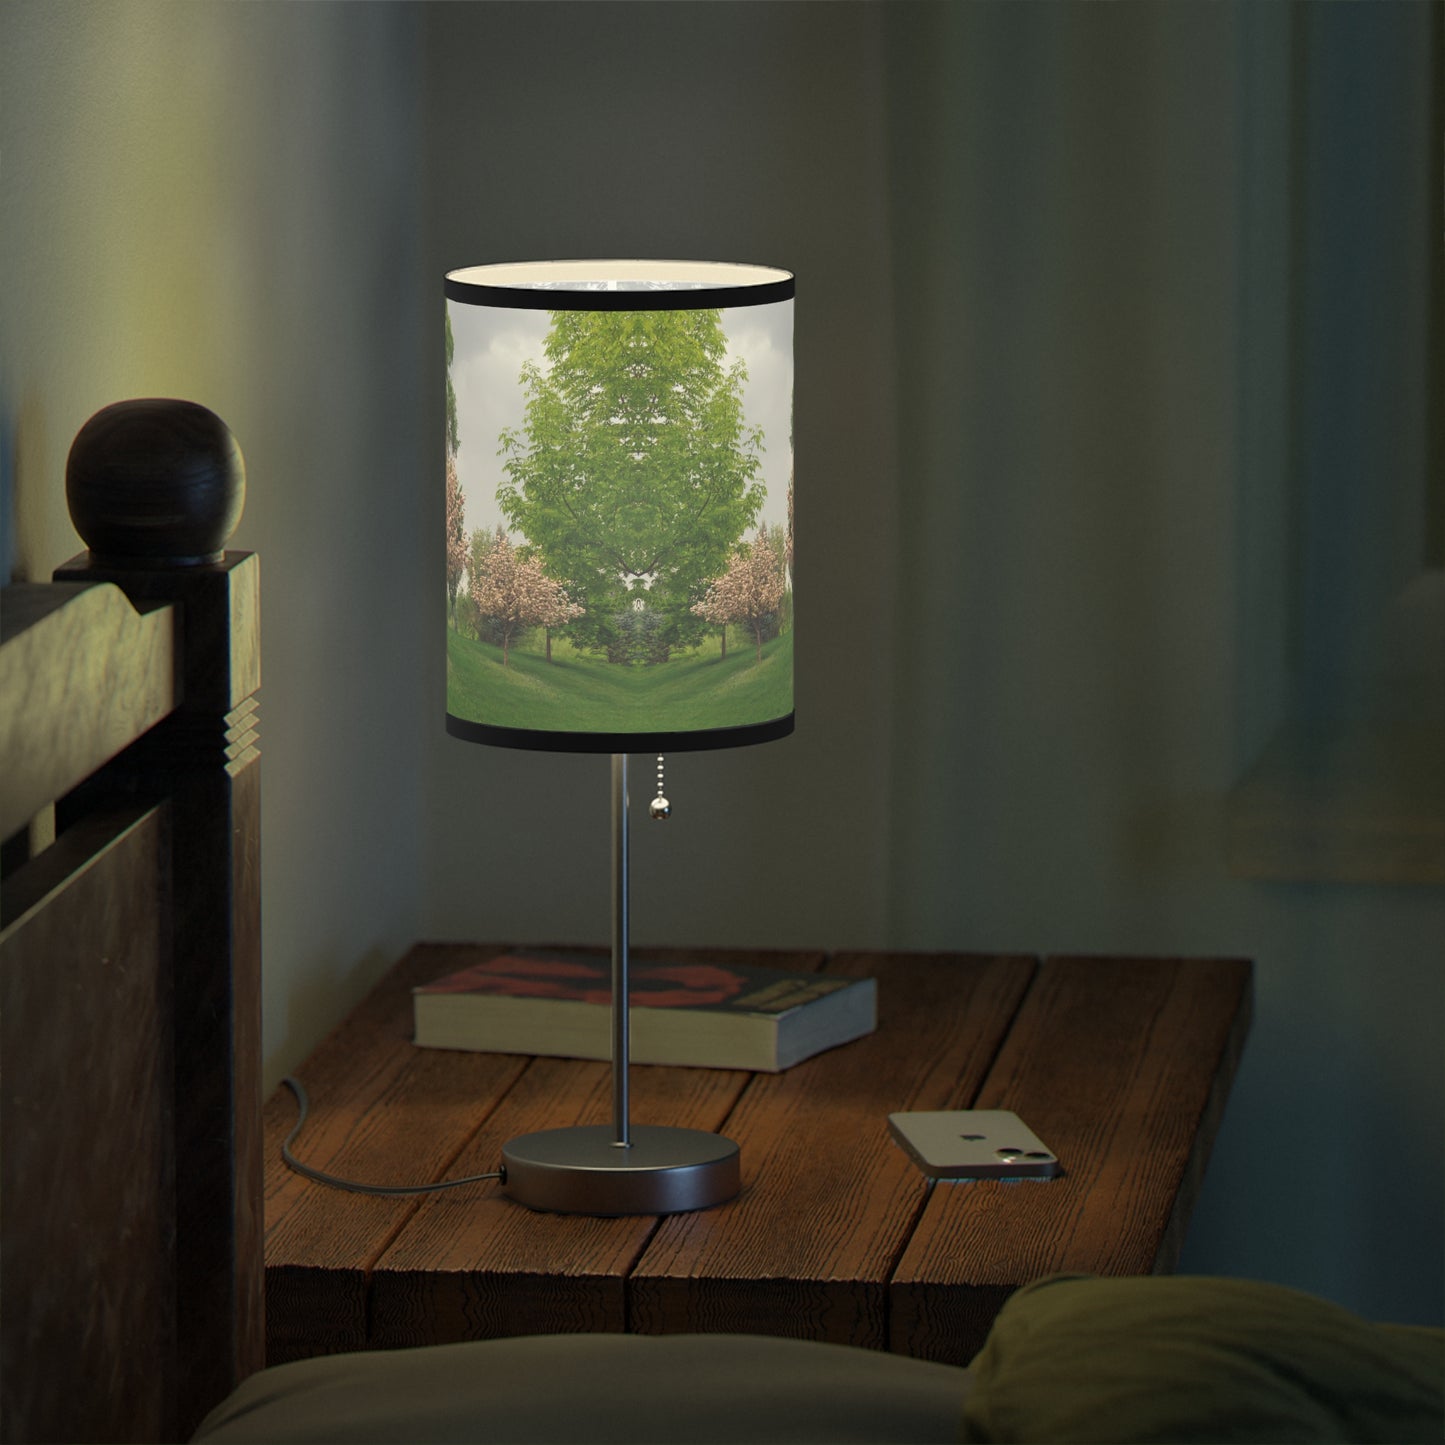 Spring In The Air Lamp on a Stand